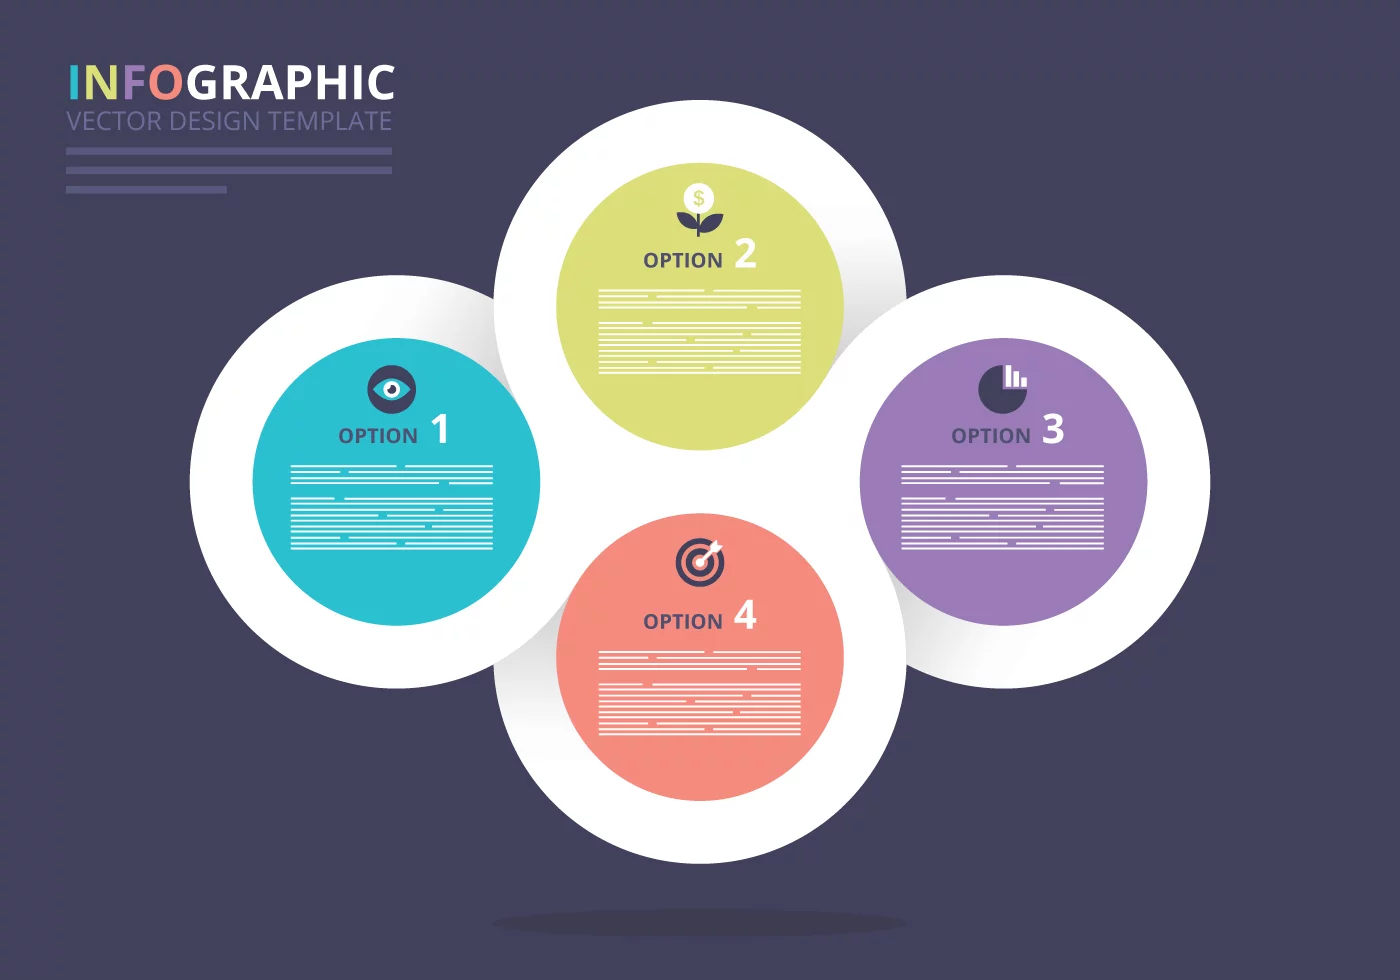 infographic template downloads